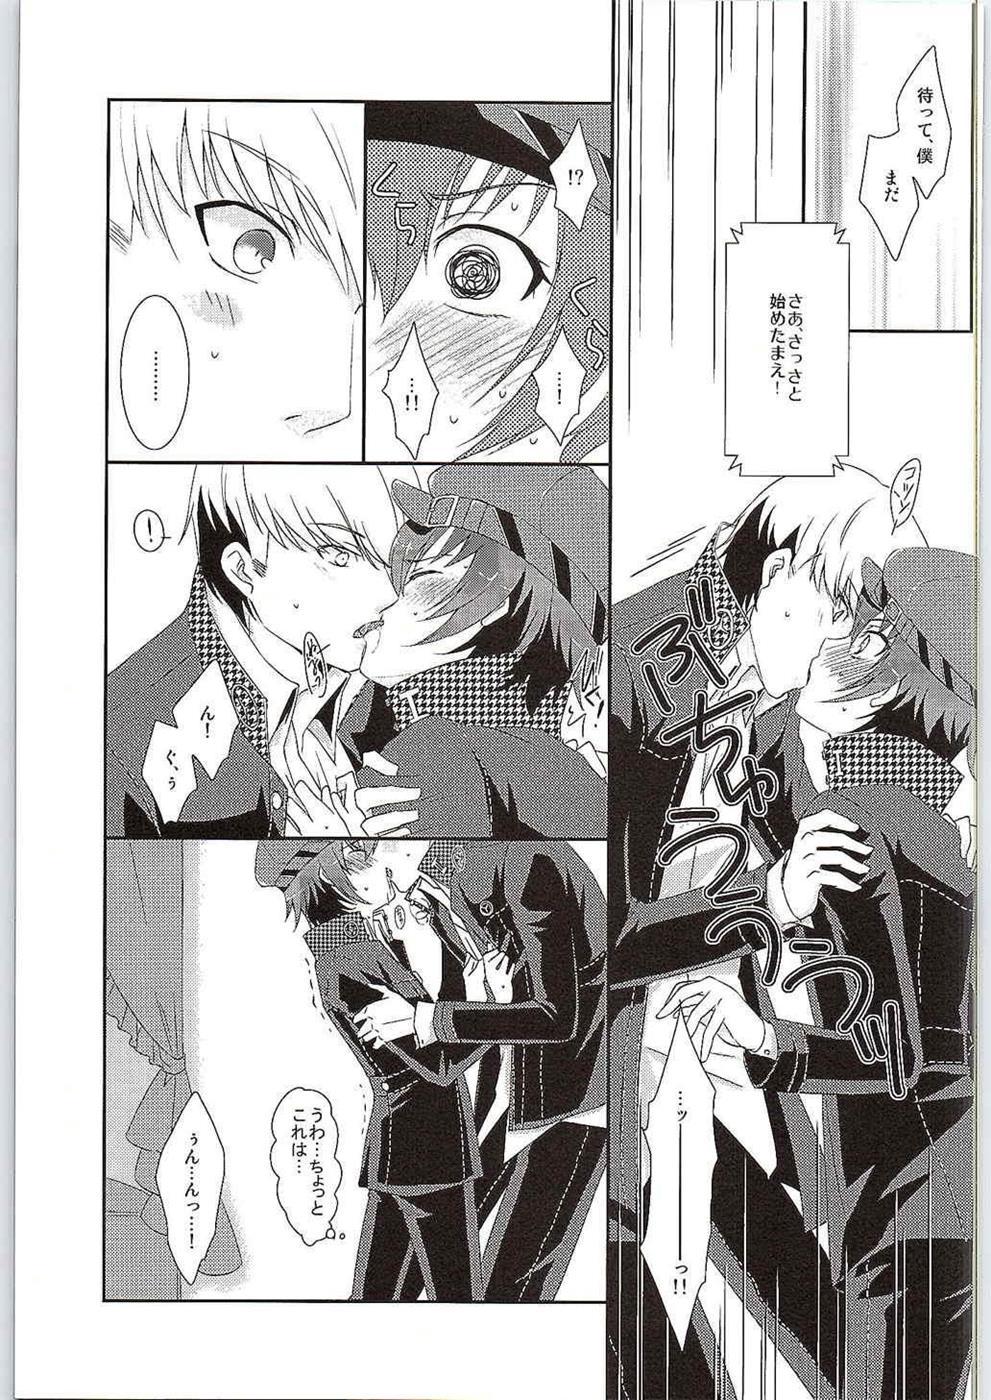 Ball Sucking Hyperbolic Lover - Persona 4 Seduction - Page 8